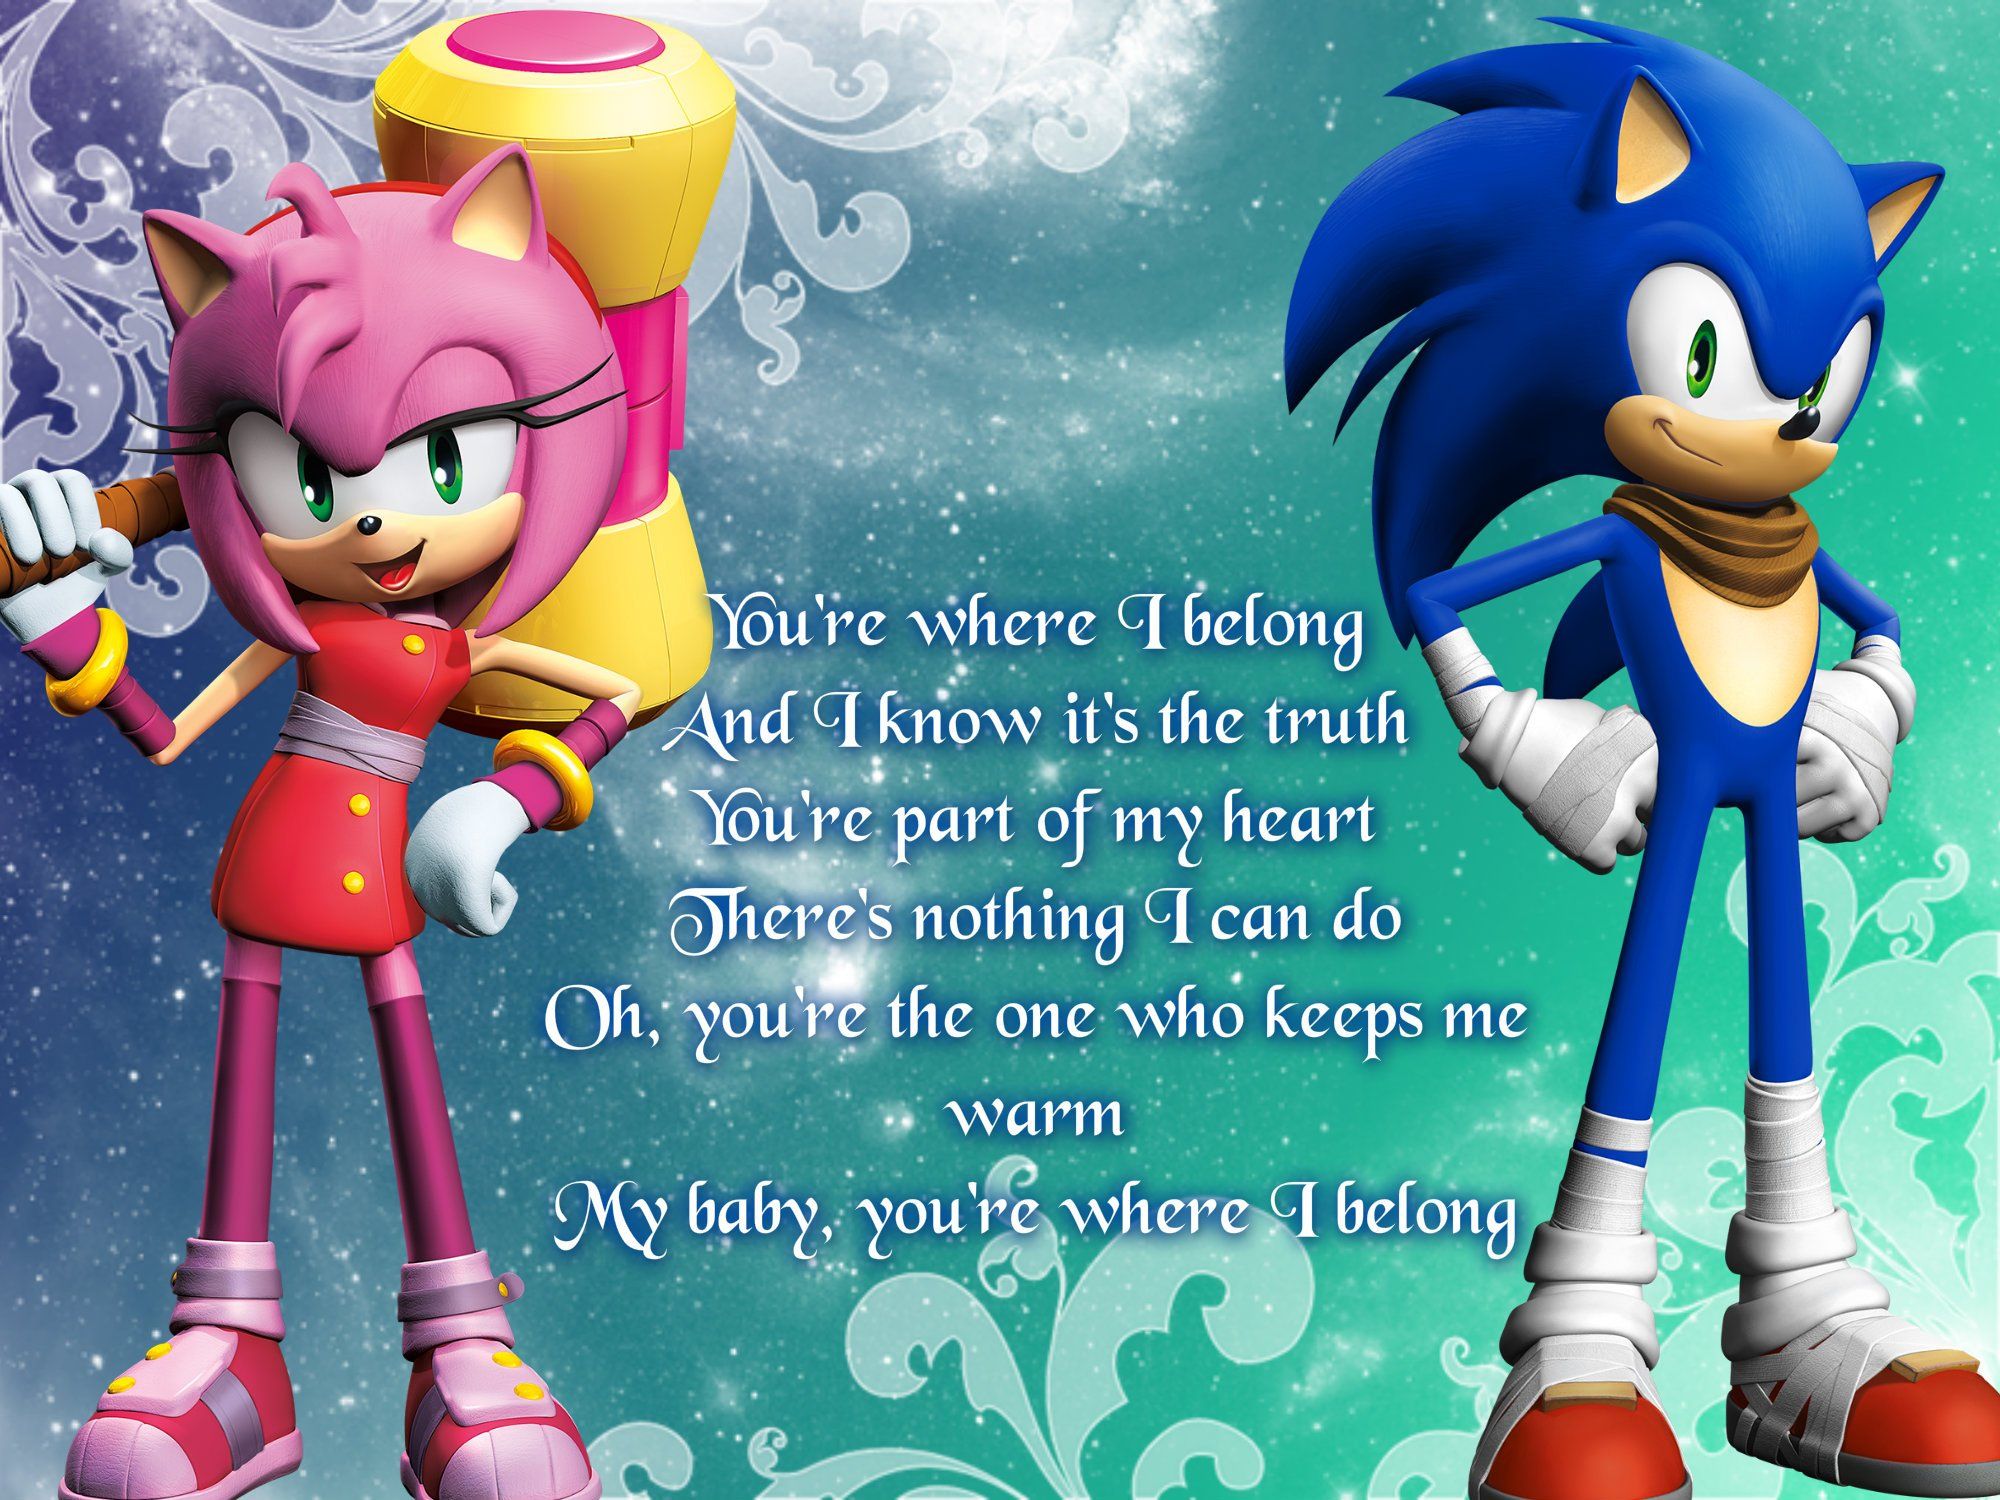 Free download Sonic and Amy sonic boom by Sonamy115 [2000x1500] for your Desktop, Mobile & Tablet. Explore Sonamy Boom Wallpaper. Sonamy Boom Wallpaper, Boom Wallpaper, Sonic Boom Wallpaper